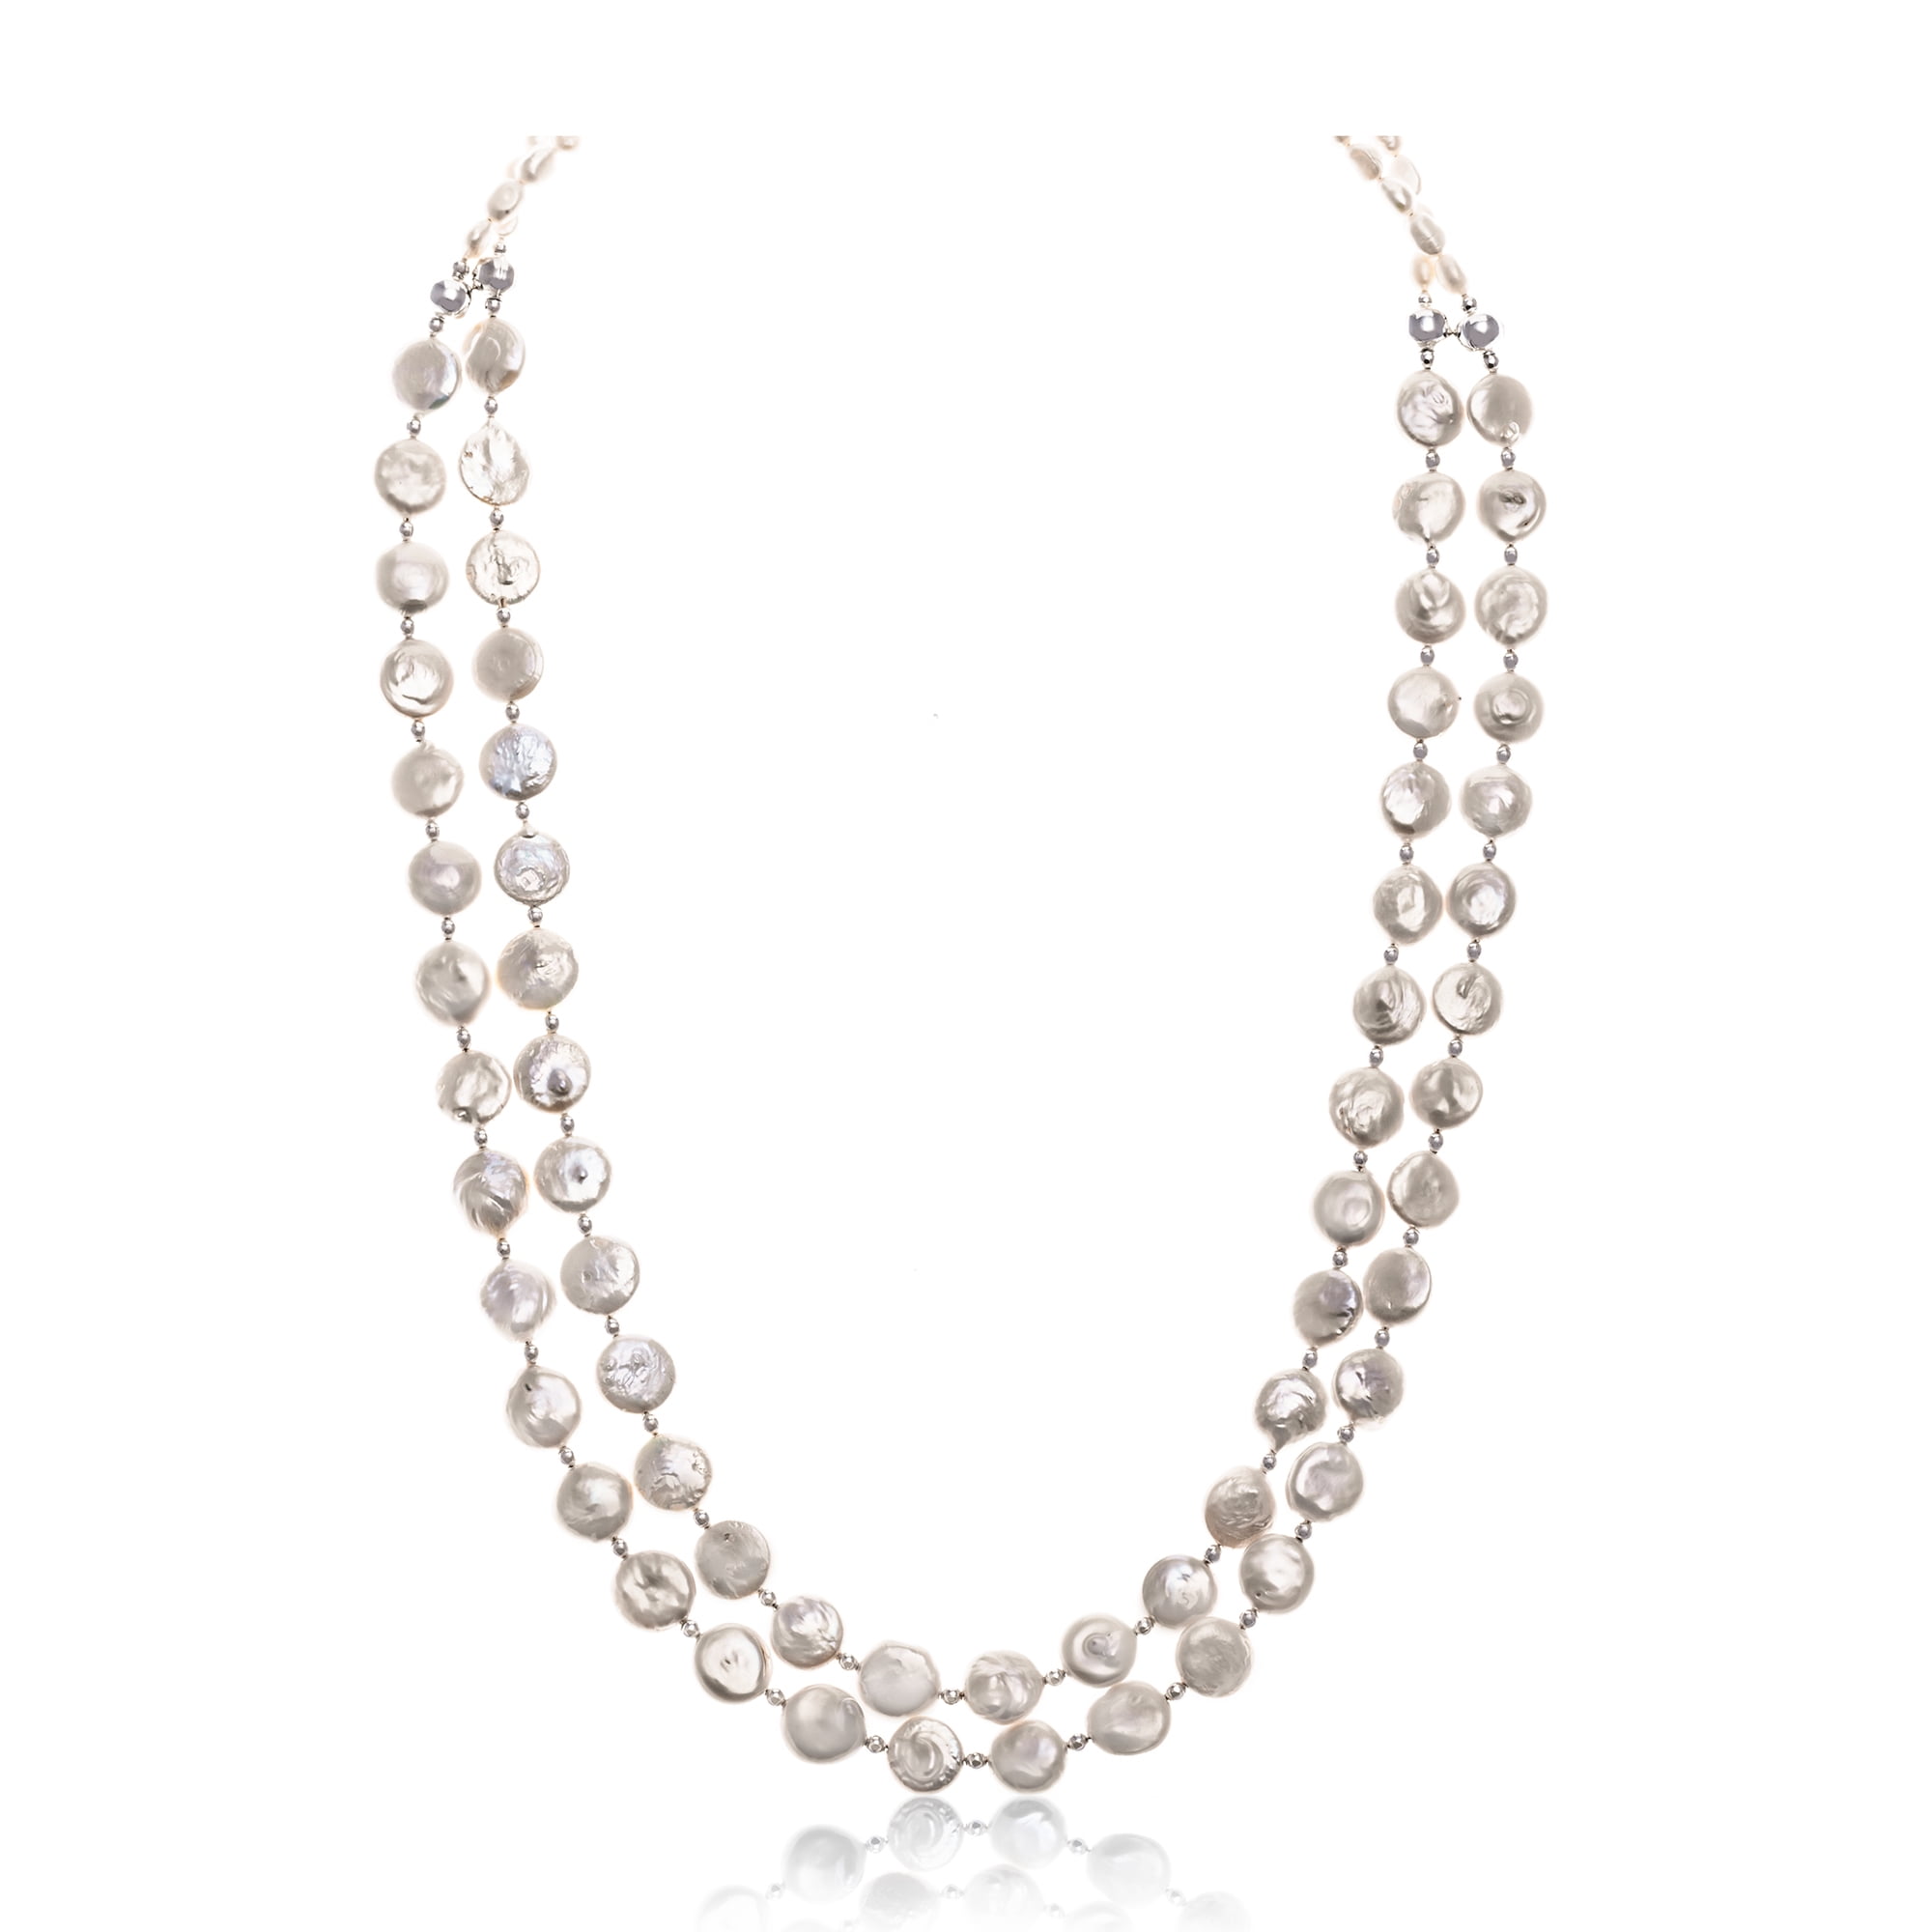 Mikimoto Double Strand Pearl Necklace - 2 For Sale on 1stDibs | mikimoto 3 strand  pearl necklace, double strand mikimoto pearl necklace, double row pearl  necklace